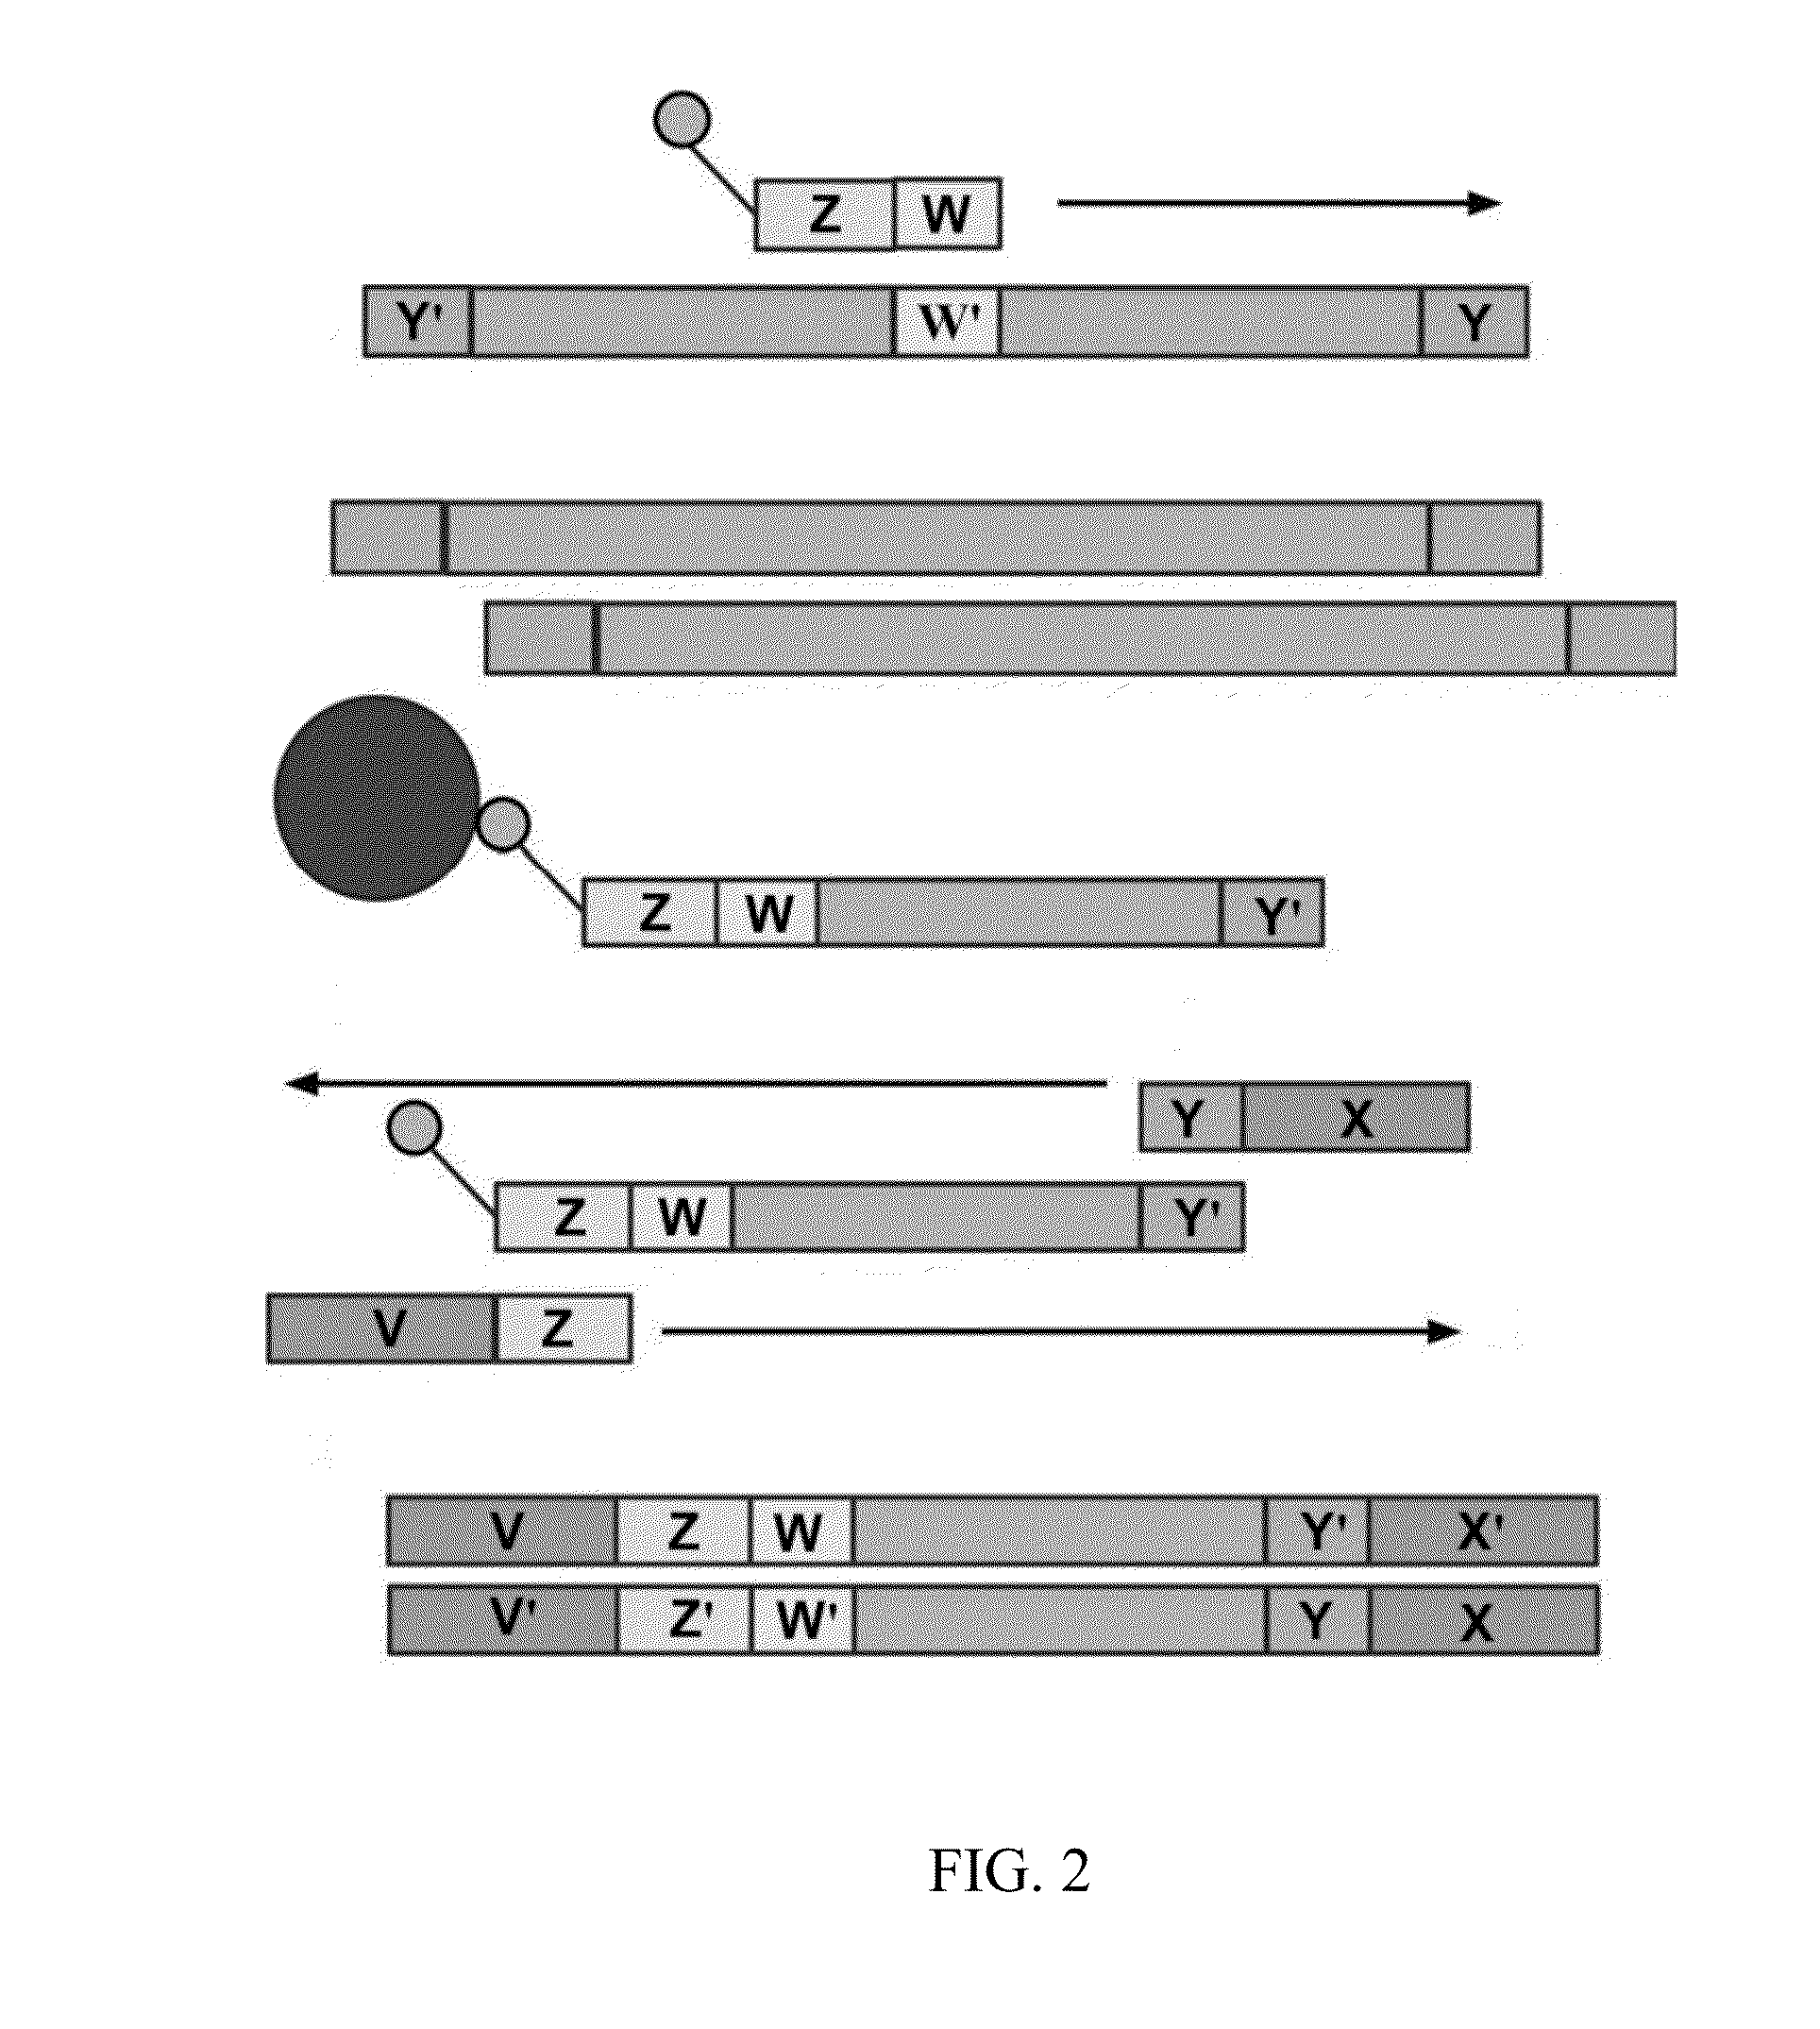 Apparatus and methods for high-throughput sequencing